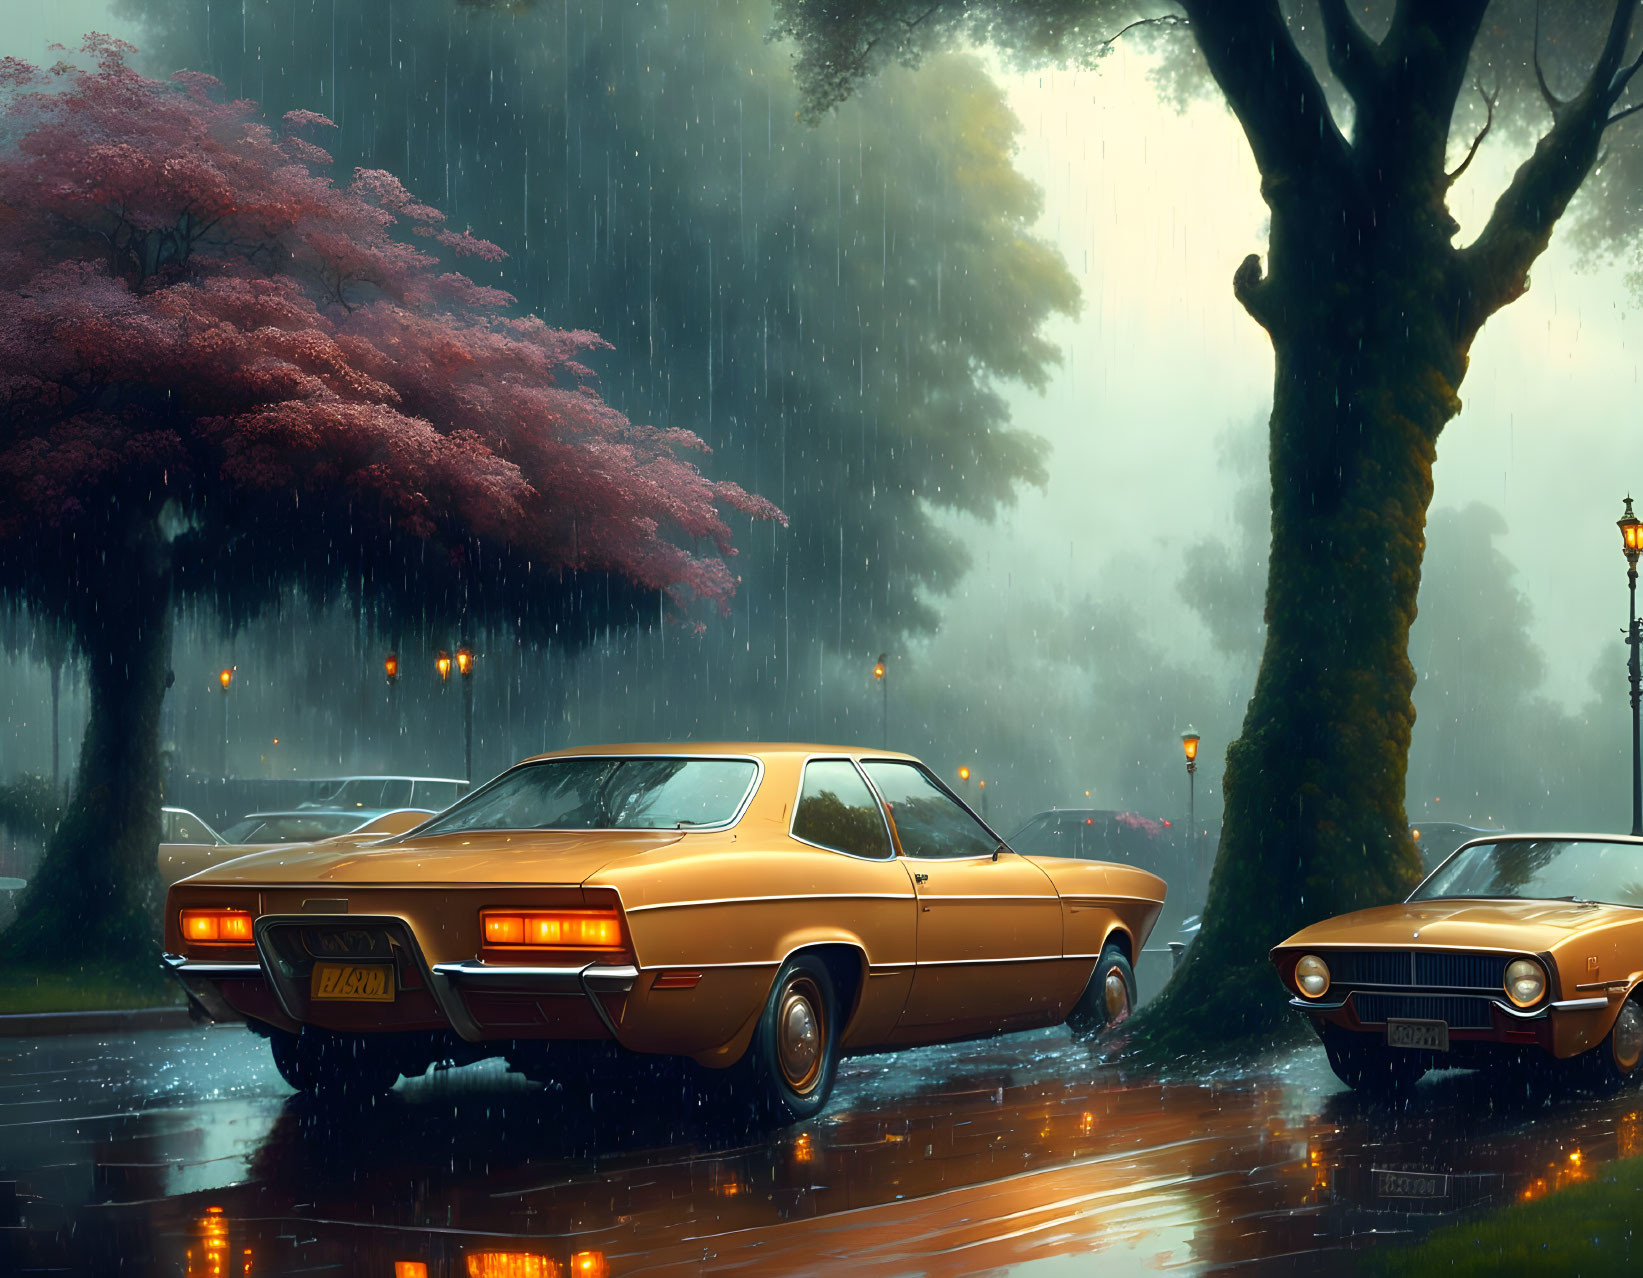 Classic Cars Parked Under Cherry Tree in Rain Shower